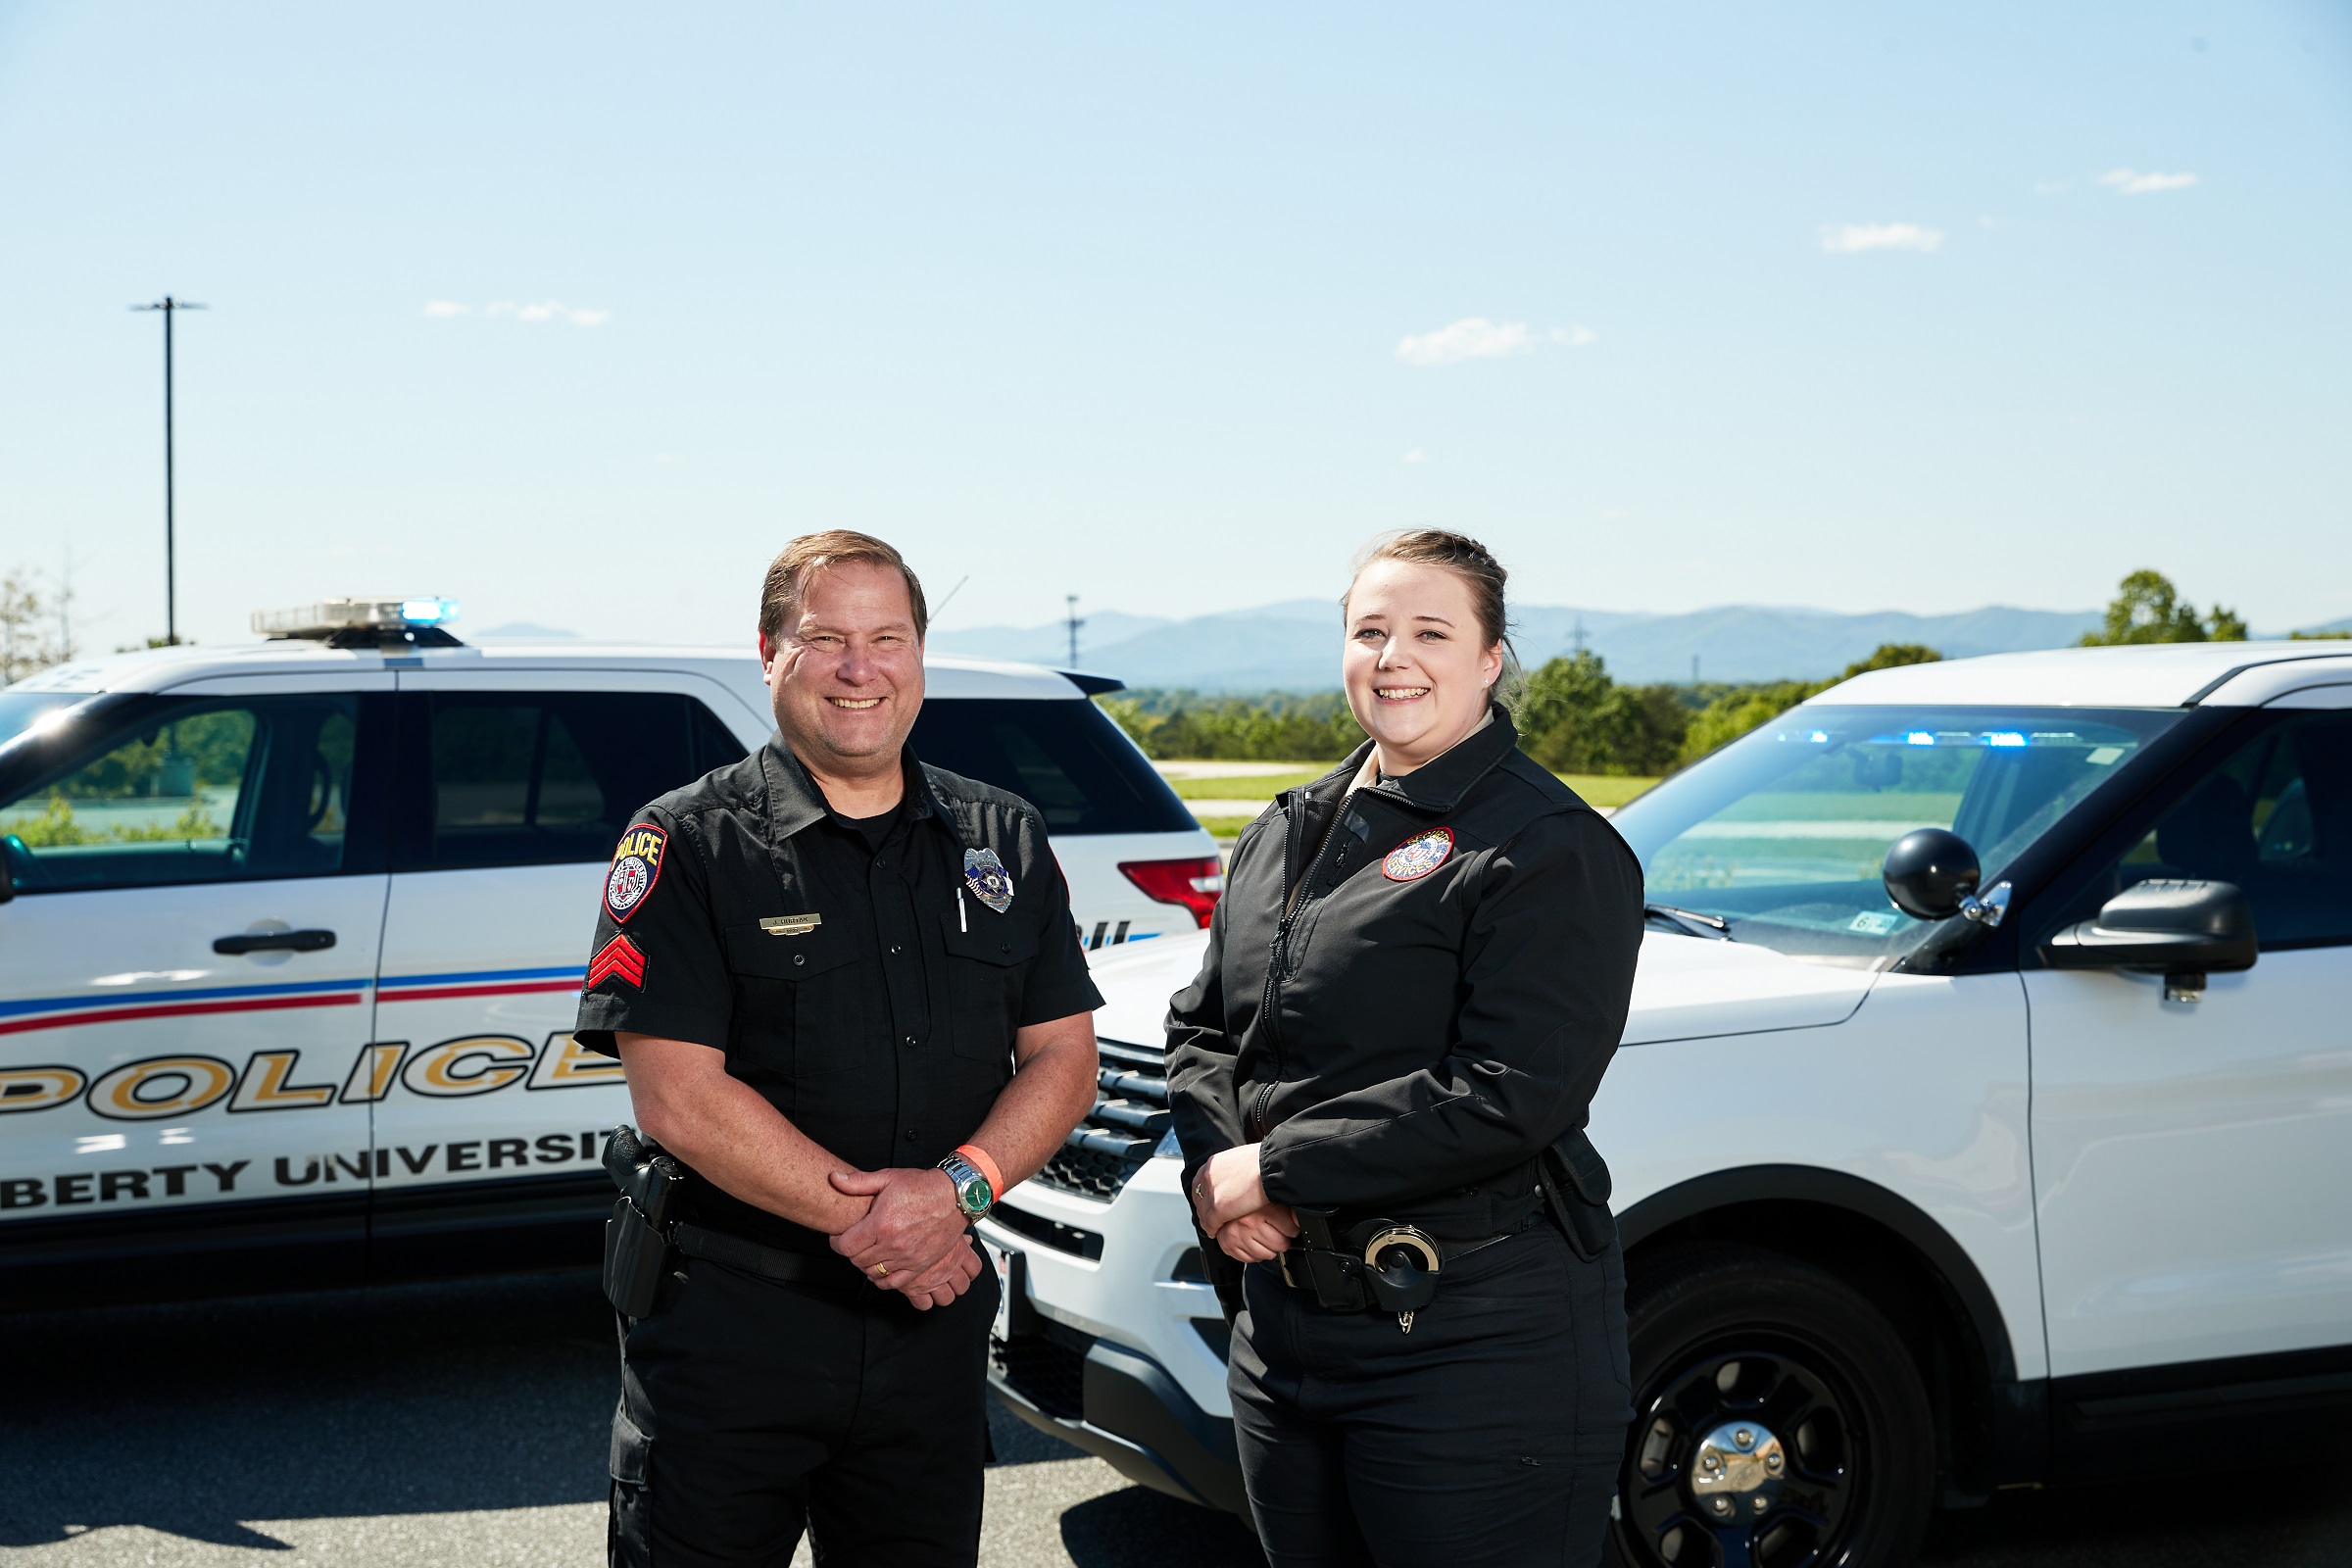 LUPD Brochure Promo Takes Place On May 7, 2020. (Photo By Andrew Snyder)